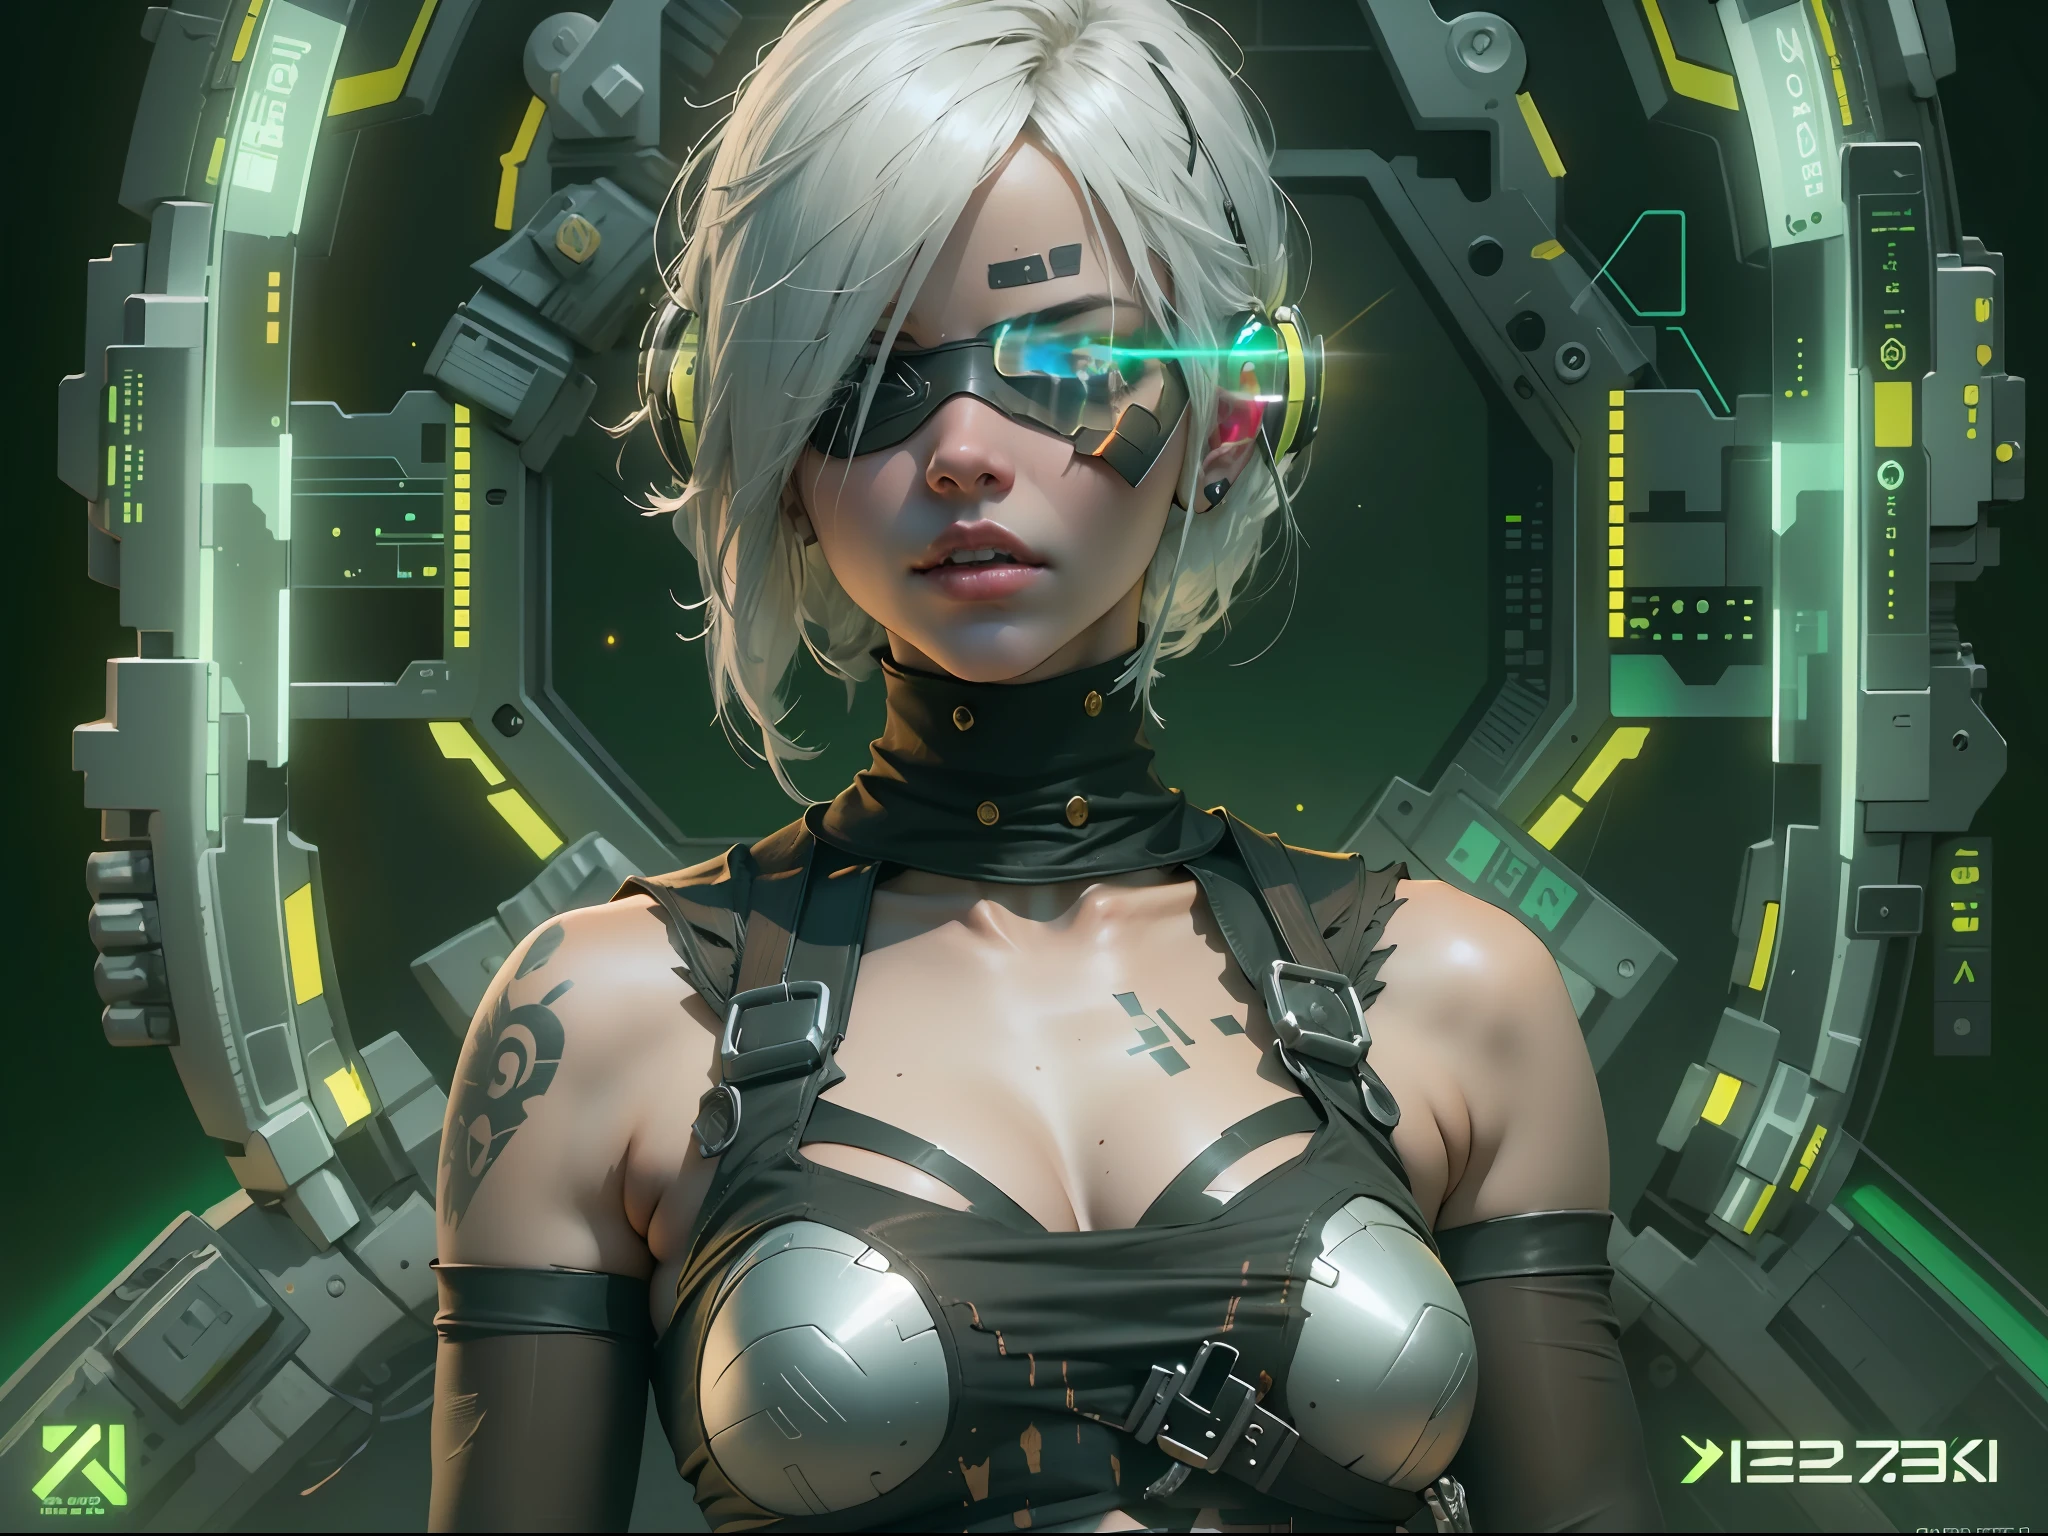 ((Best Quality)), ((Masterpiece)), (Very detailed:1.3), 3D, beautiful (Cyberpunk:1.3) 2b nier automata, (Yorha unit no 2 type B), hacker woman, Thick hair, Revealing clothing, operational computer terminals, computer servers, LCD screens, fibre optic cables, corporate logos, HDR (High Dymanic Range), ray tracing, NVIDIA RTX, super resolution, Unreal 5, Sub-Surface Scatterring, PBR Textures, Post processing, Anisotropic filtering, depth of field, maximum sharpness and sharpness, Multilayer textures,  Albedo and specular mapping, surface shading, Accurate simulation of light-material interactions, perfect proportions, Octane representation, duotone lighting, Low ISO, white balance, rule of thirds, wide opening, 8K RAW, high-efficiency subpixels, sub-pixel convolution, glow particles,